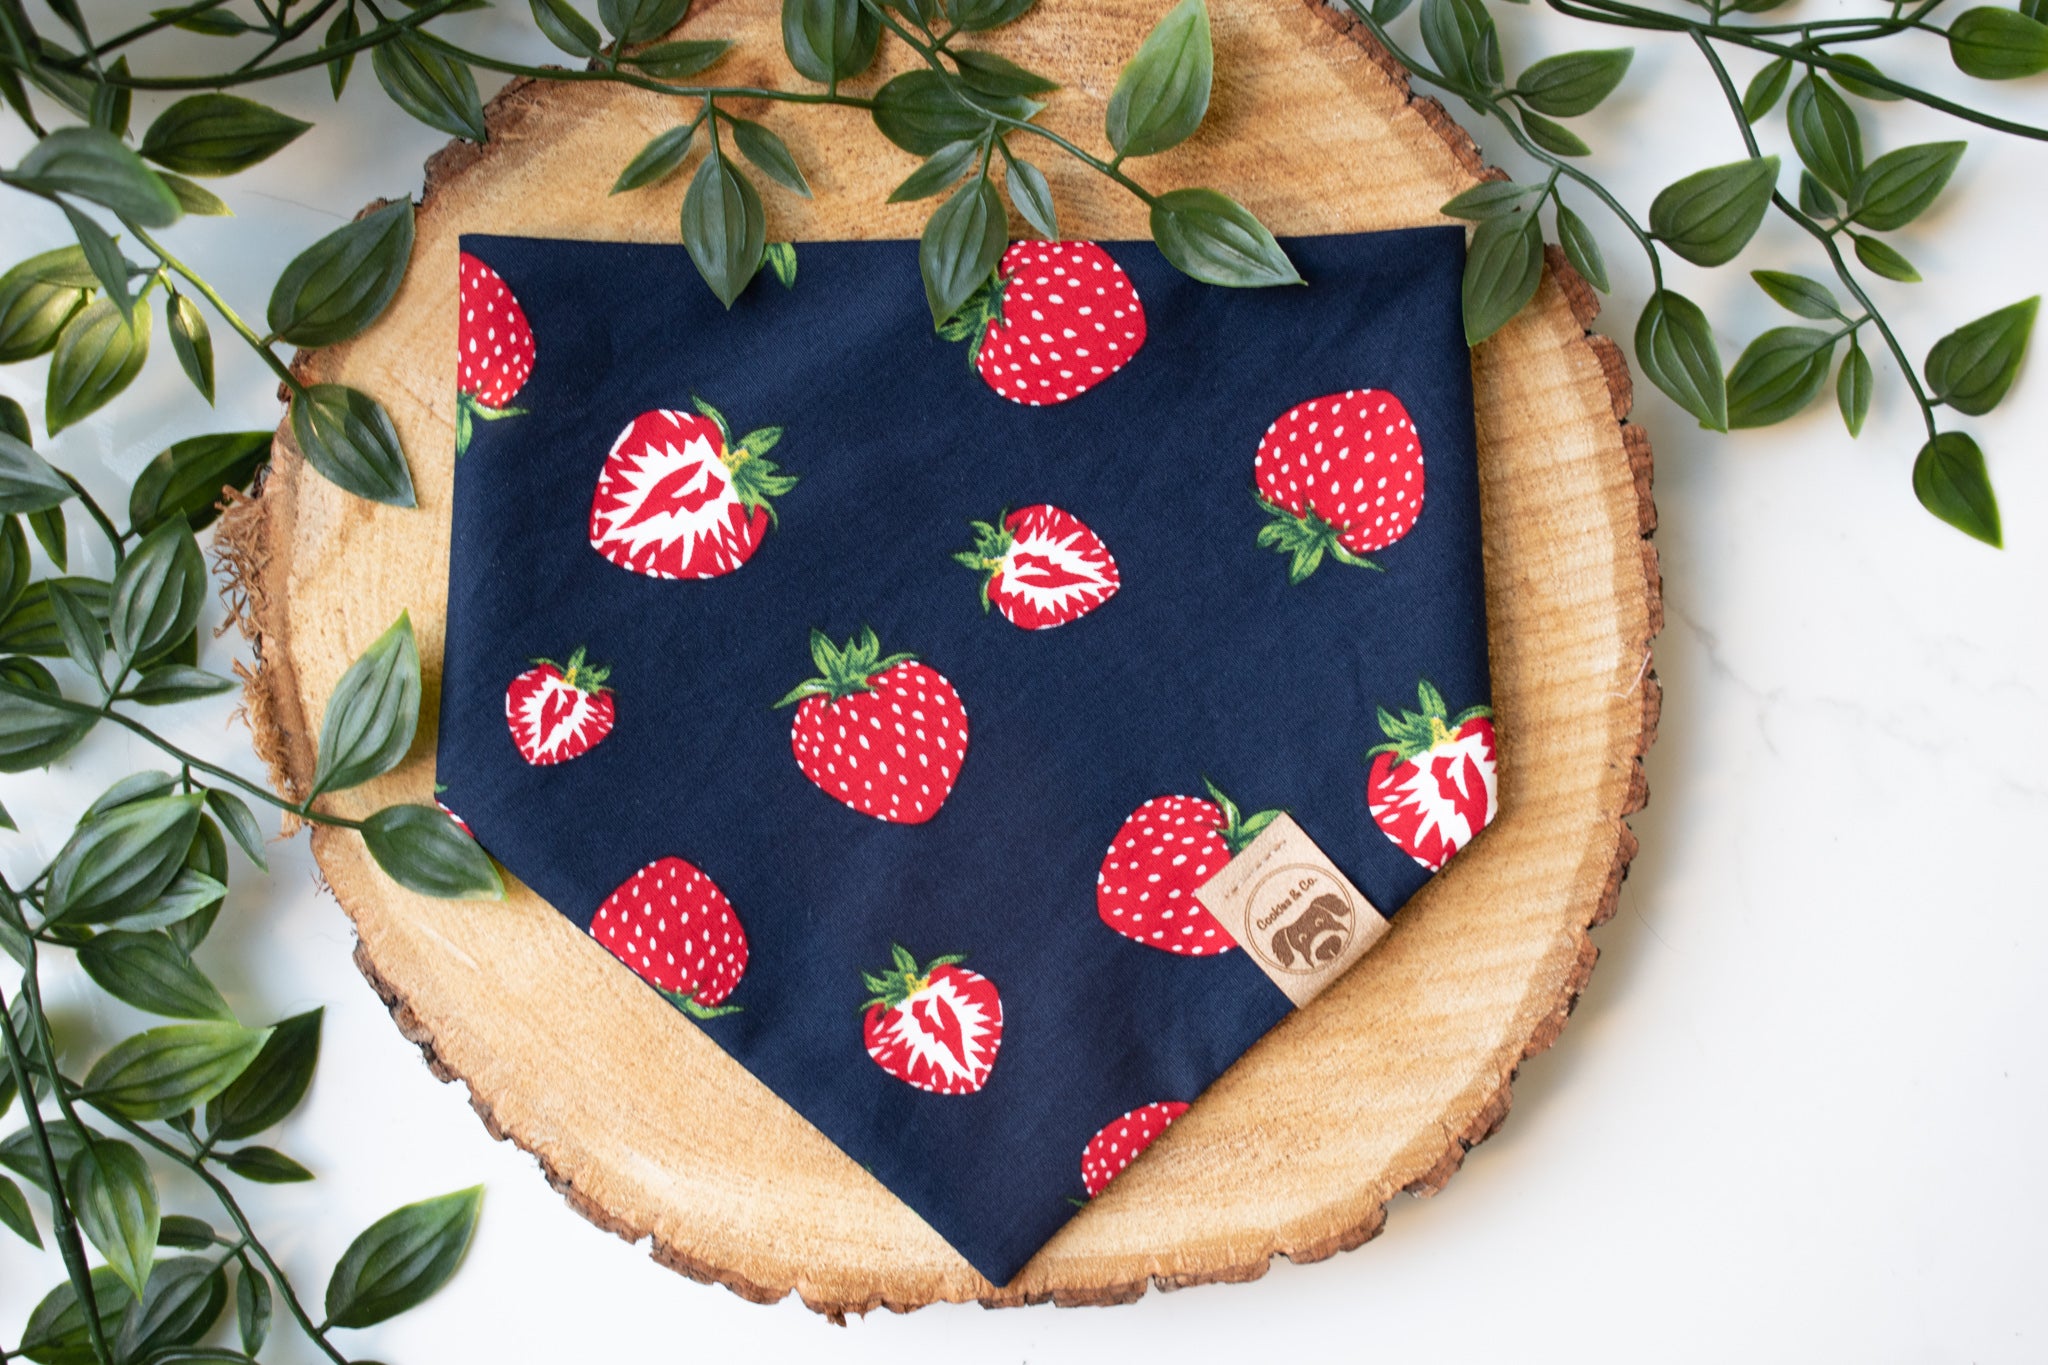 Strawberry Fields - Dog Bandana Tie-On with Snap Buttons